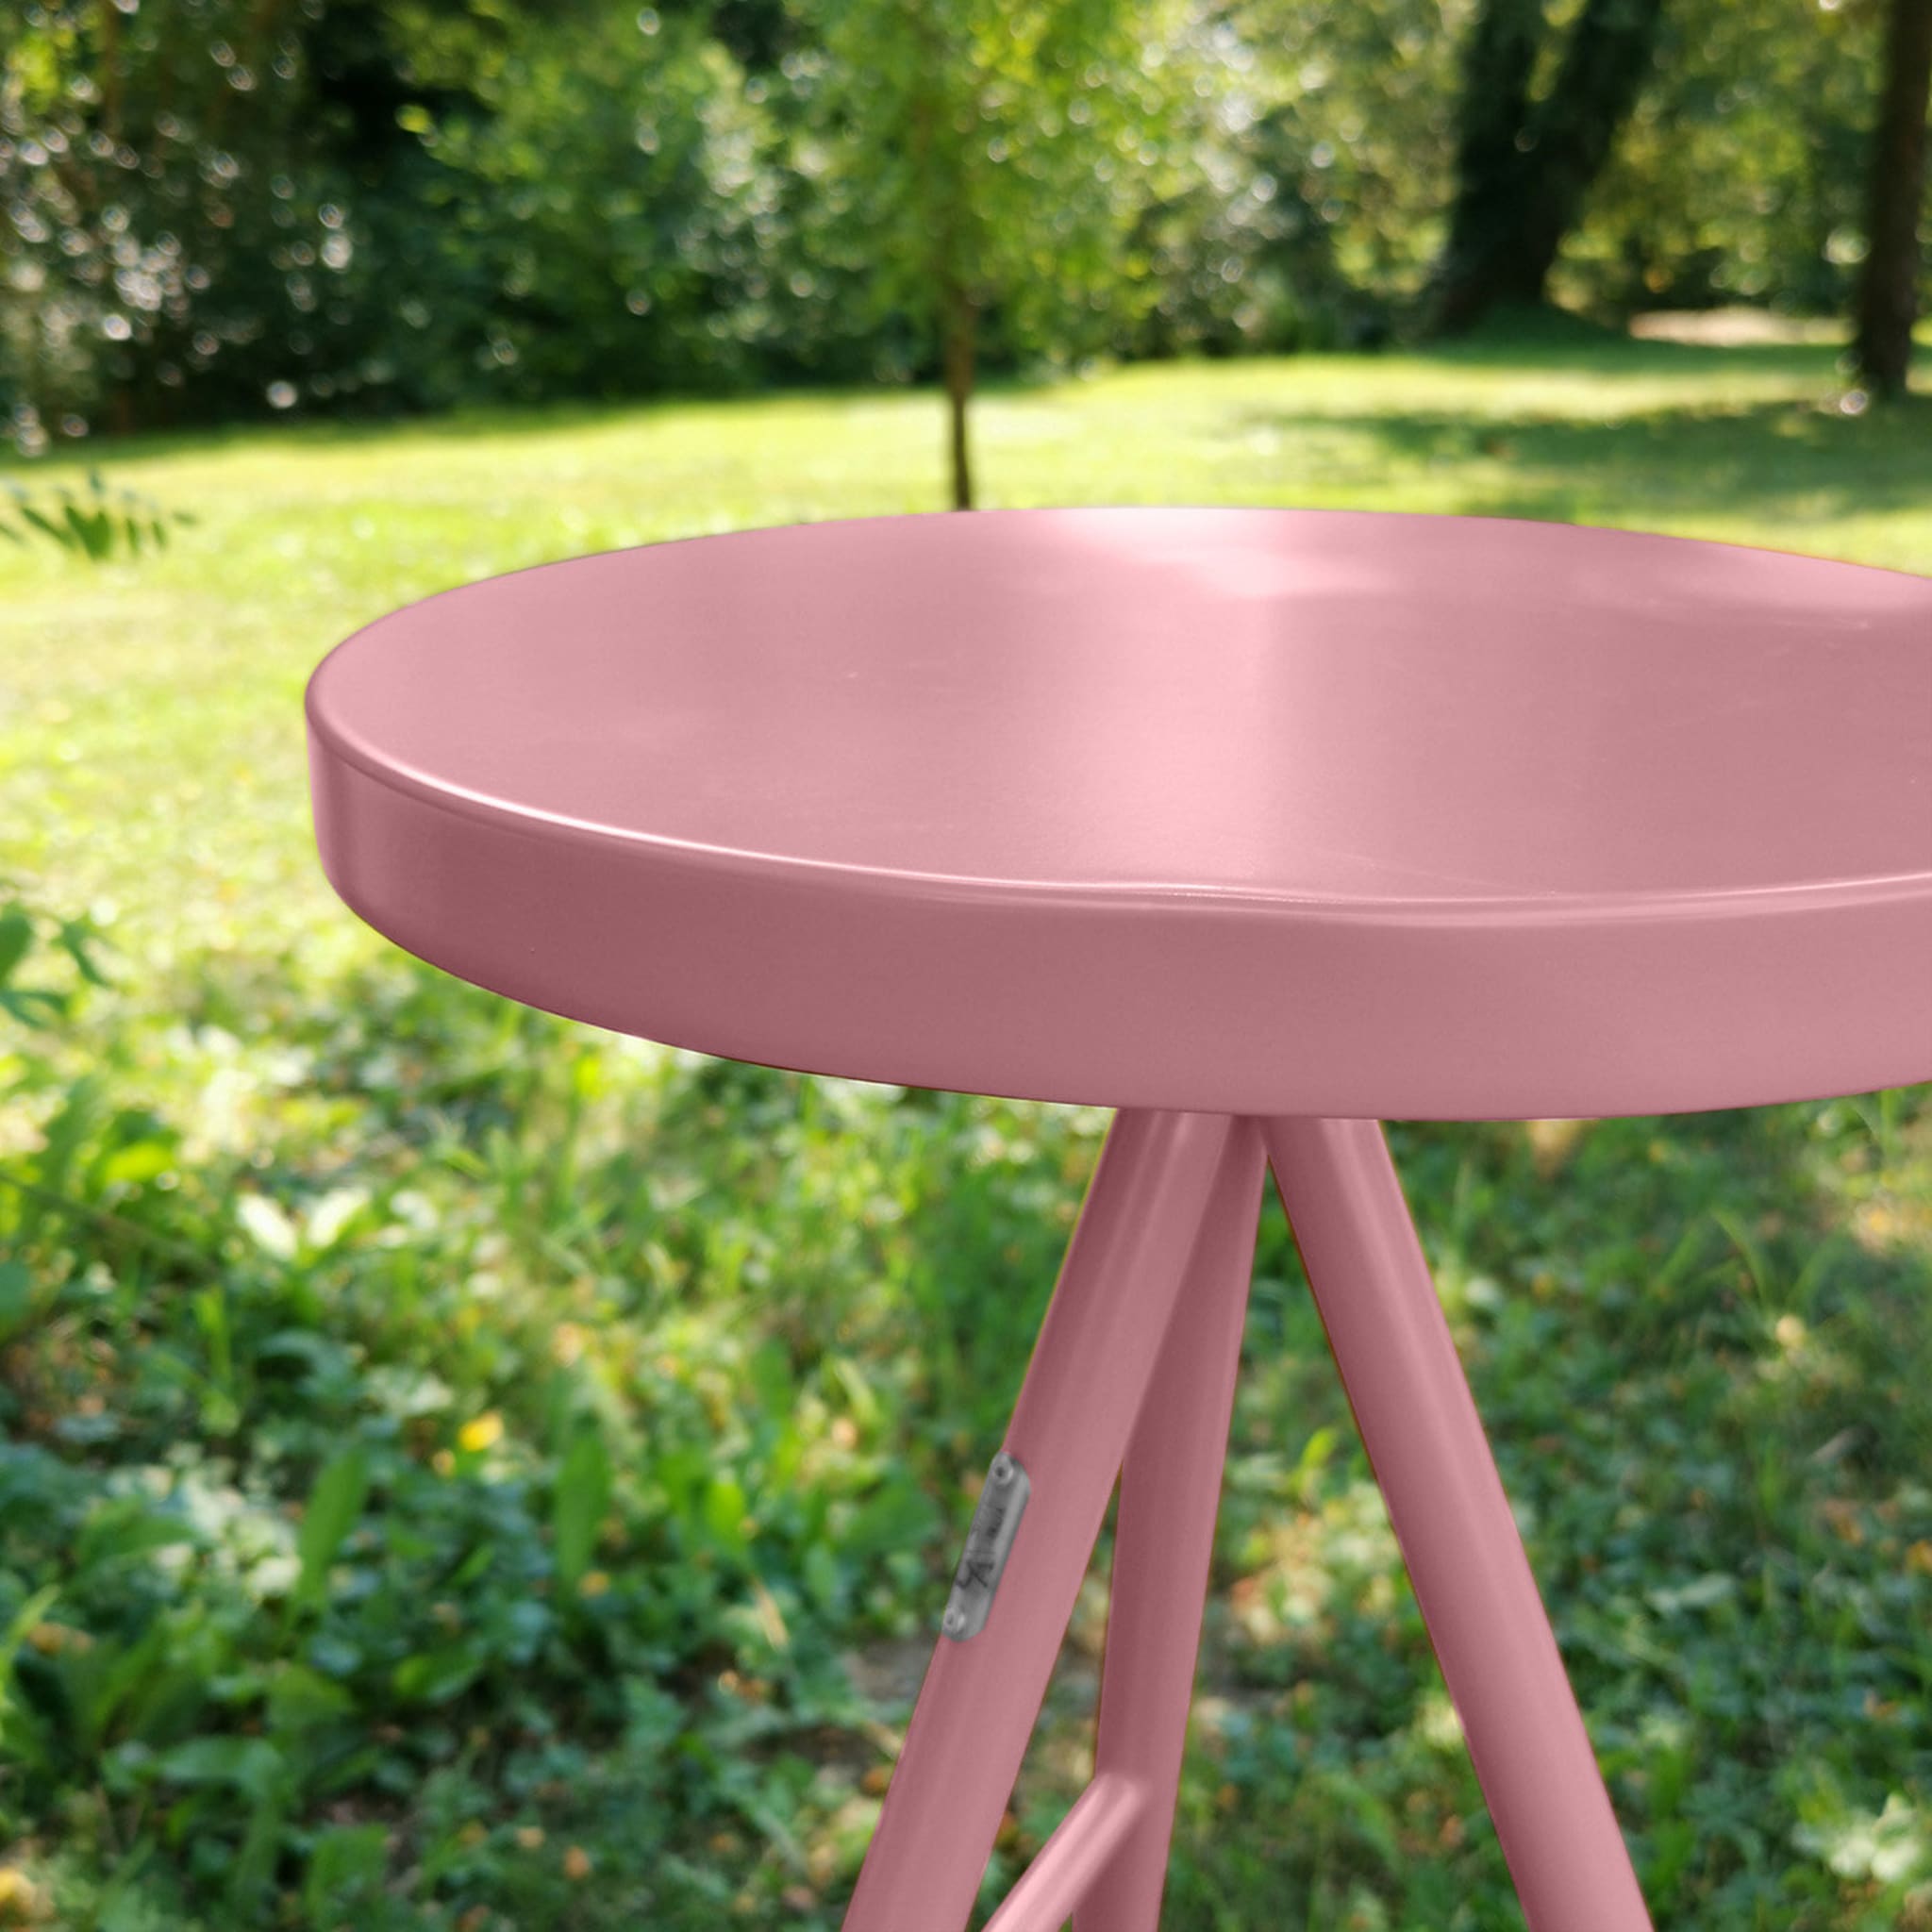 Symple Small Pink Stool - Alternative view 1